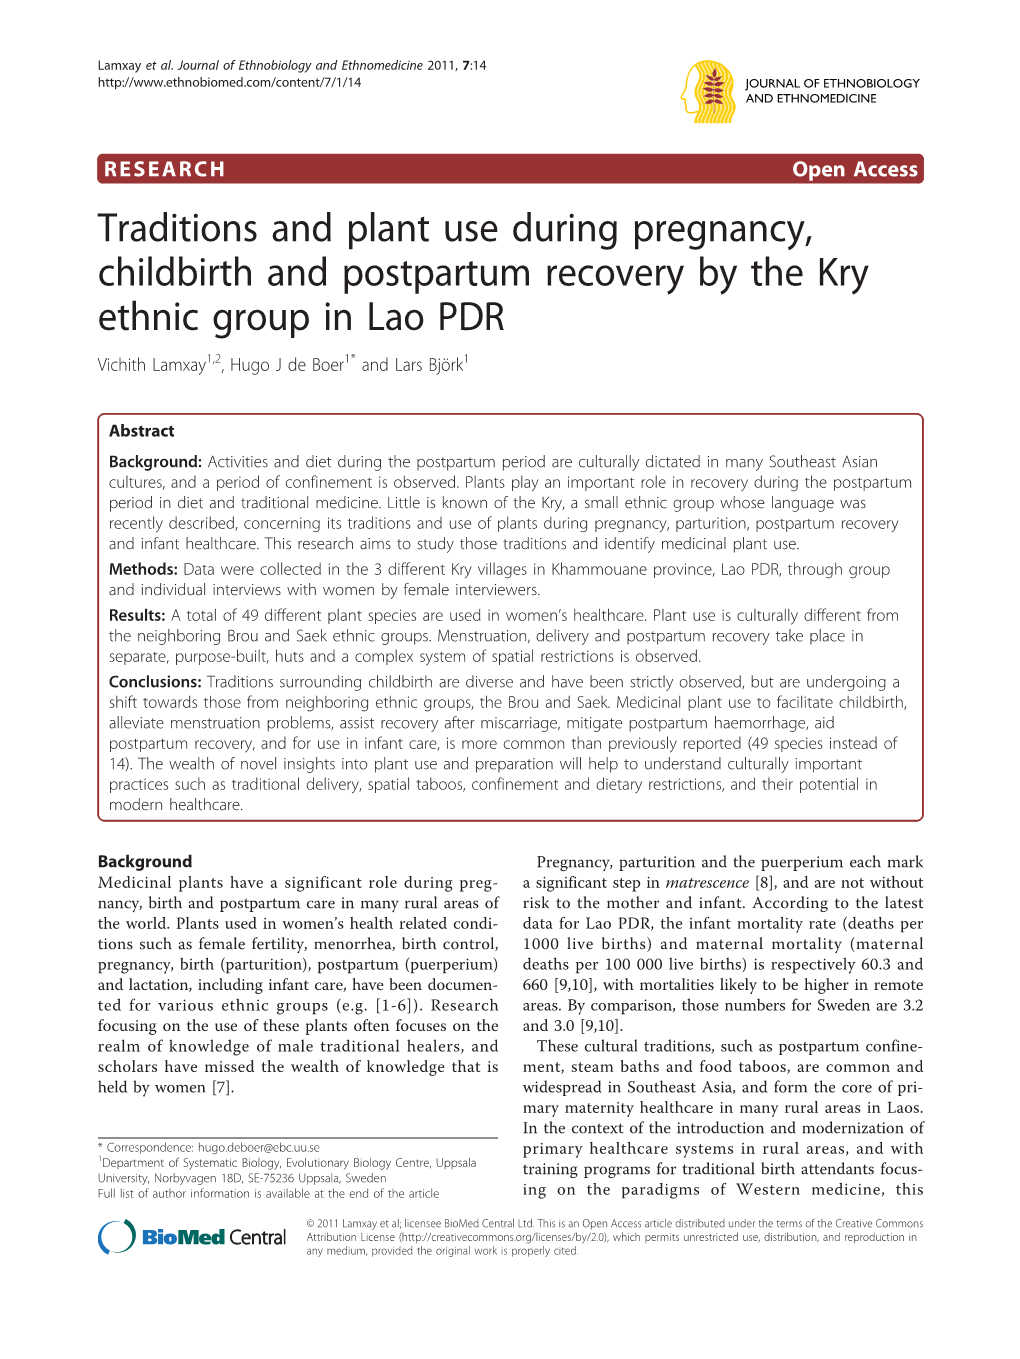 Traditions and Plant Use During Pregnancy, Childbirth and Postpartum Recovery by the Kry Ethnic Group in Lao PDR Vichith Lamxay1,2, Hugo J De Boer1* and Lars Björk1